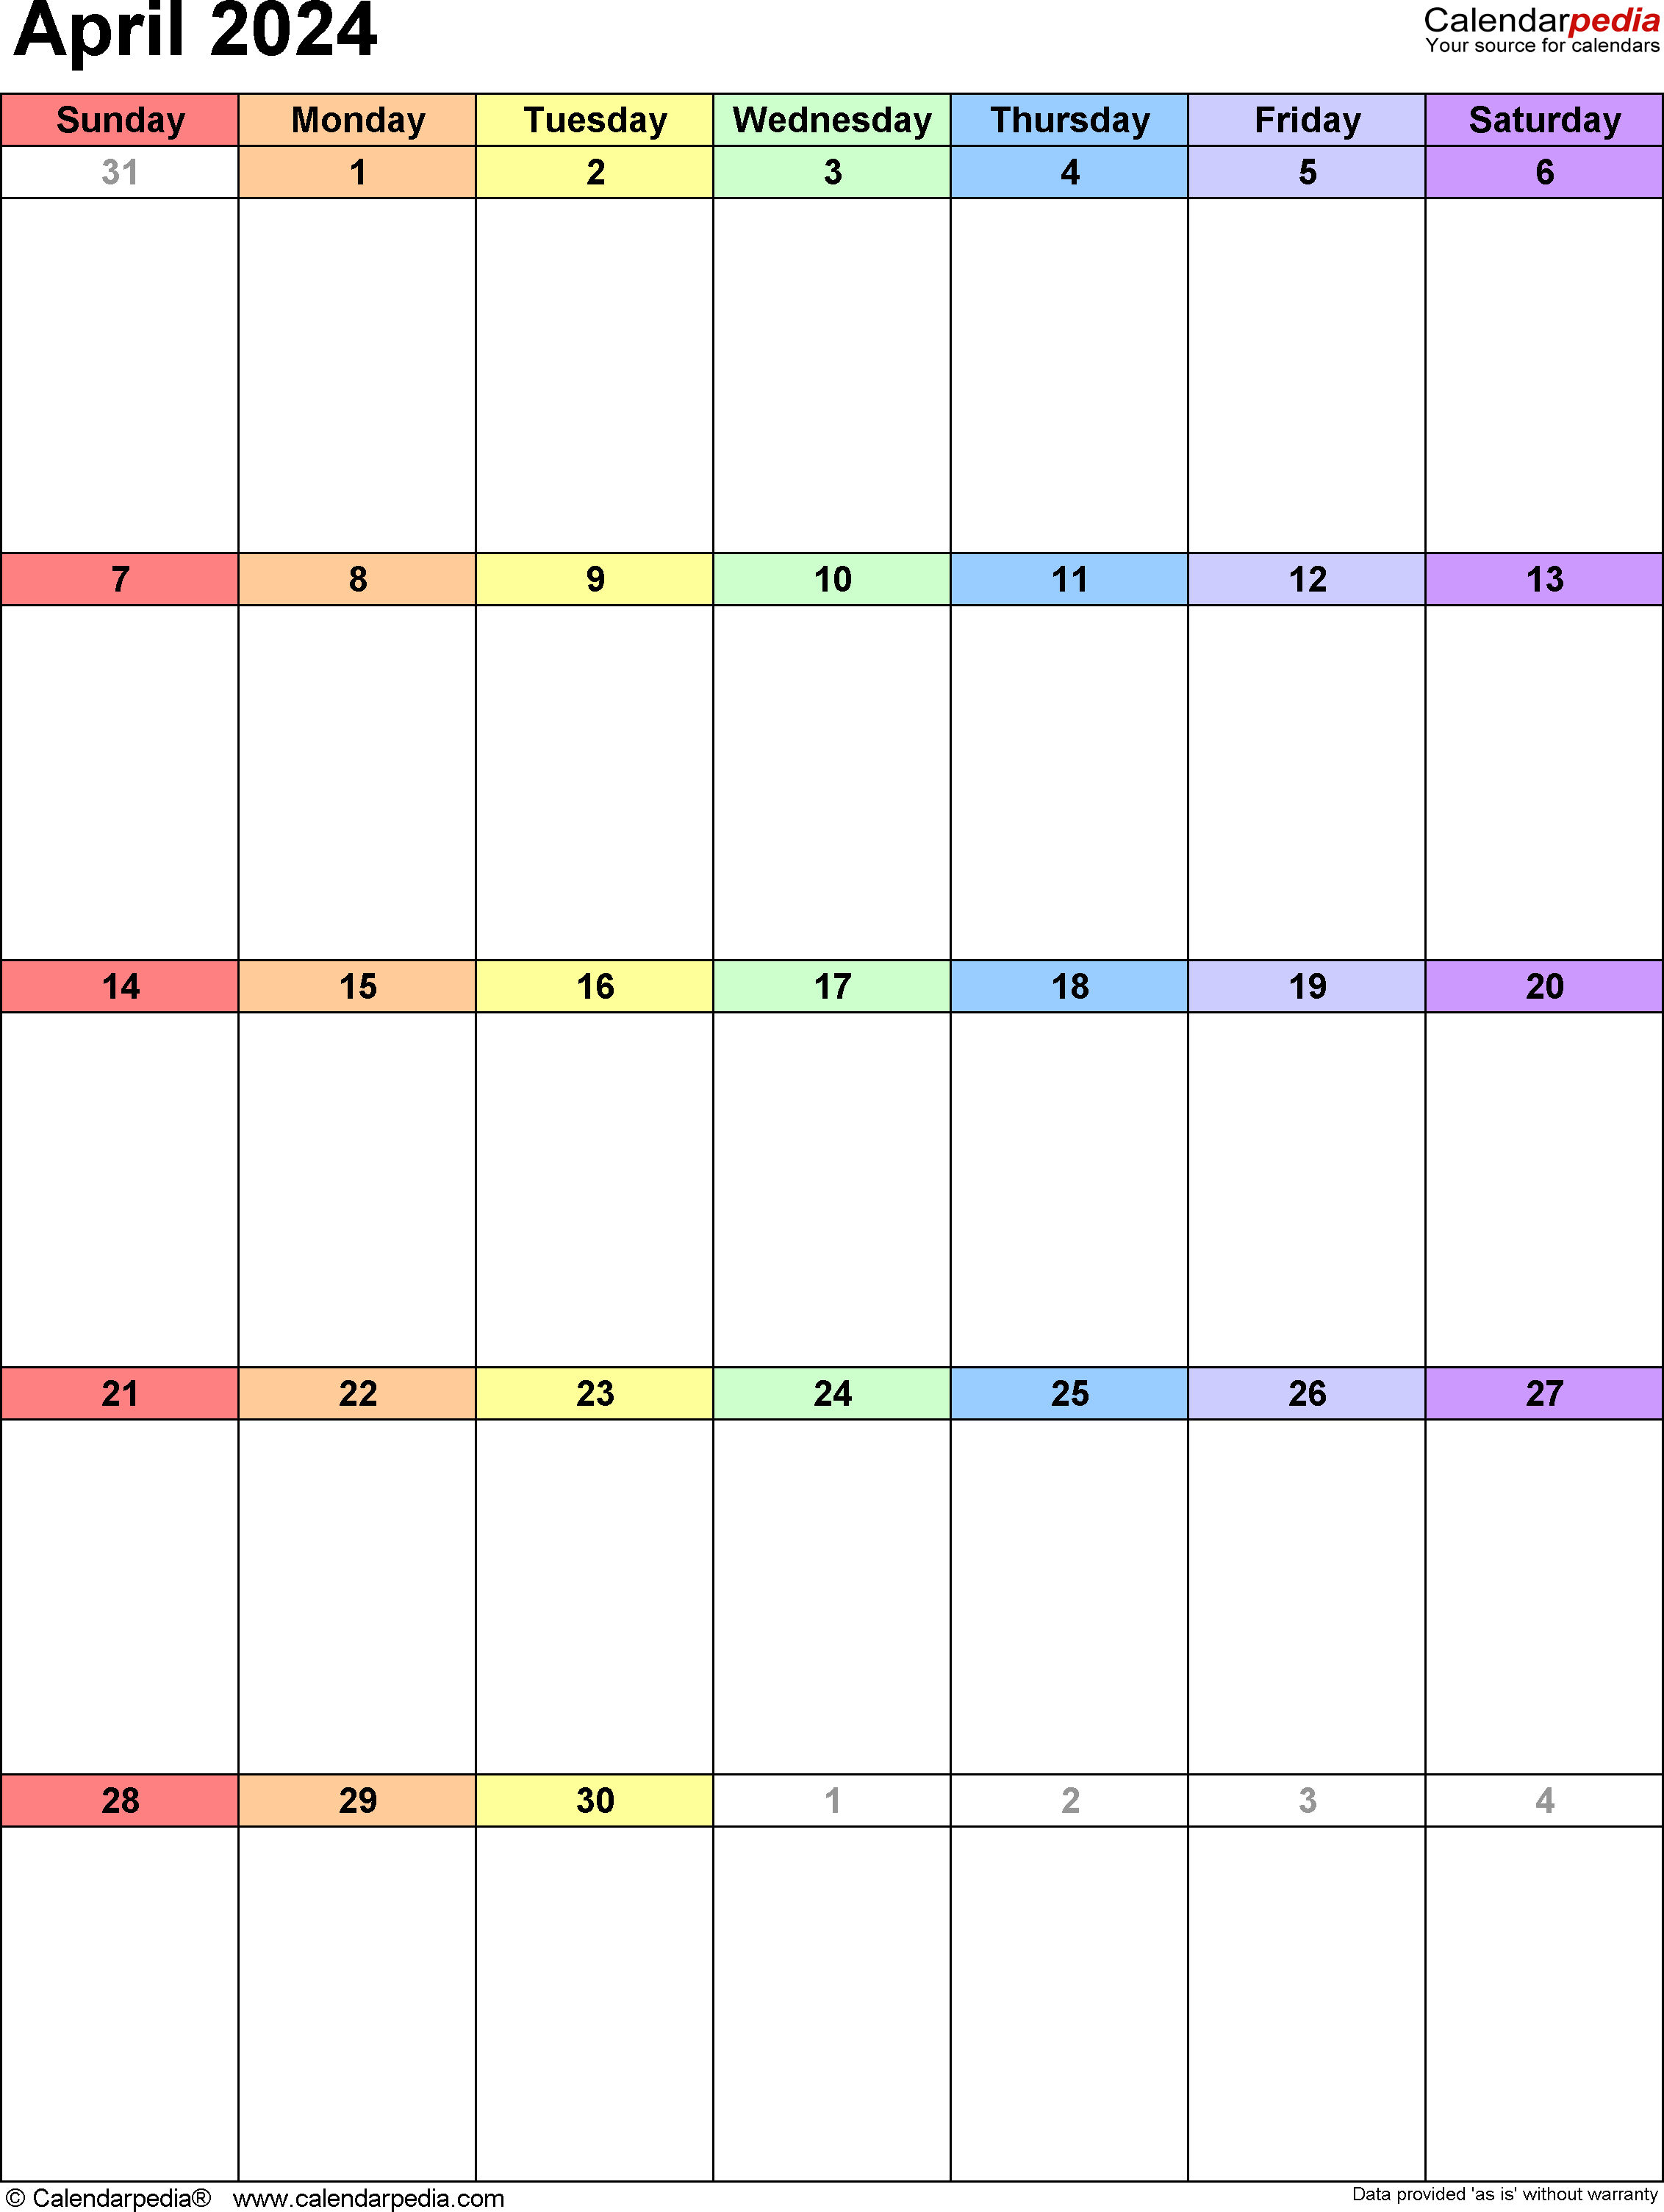 April 2024 Calendar | Templates For Word, Excel And Pdf within April Calendar 2024 Editable